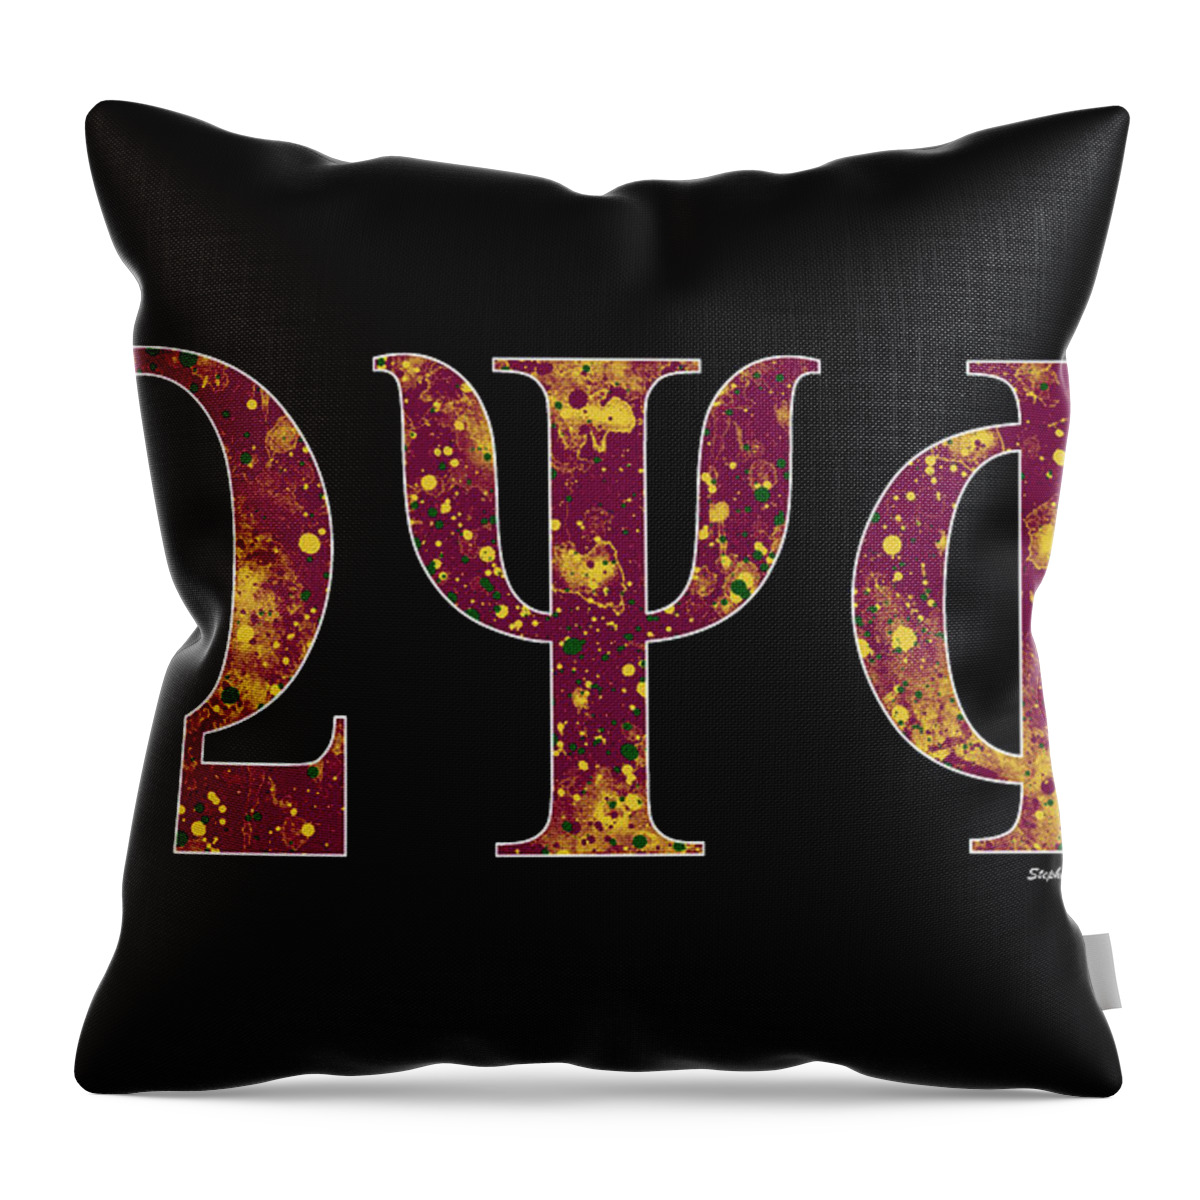 Omega Psi Phi Throw Pillow featuring the digital art Omega Psi Phi - Black by Stephen Younts